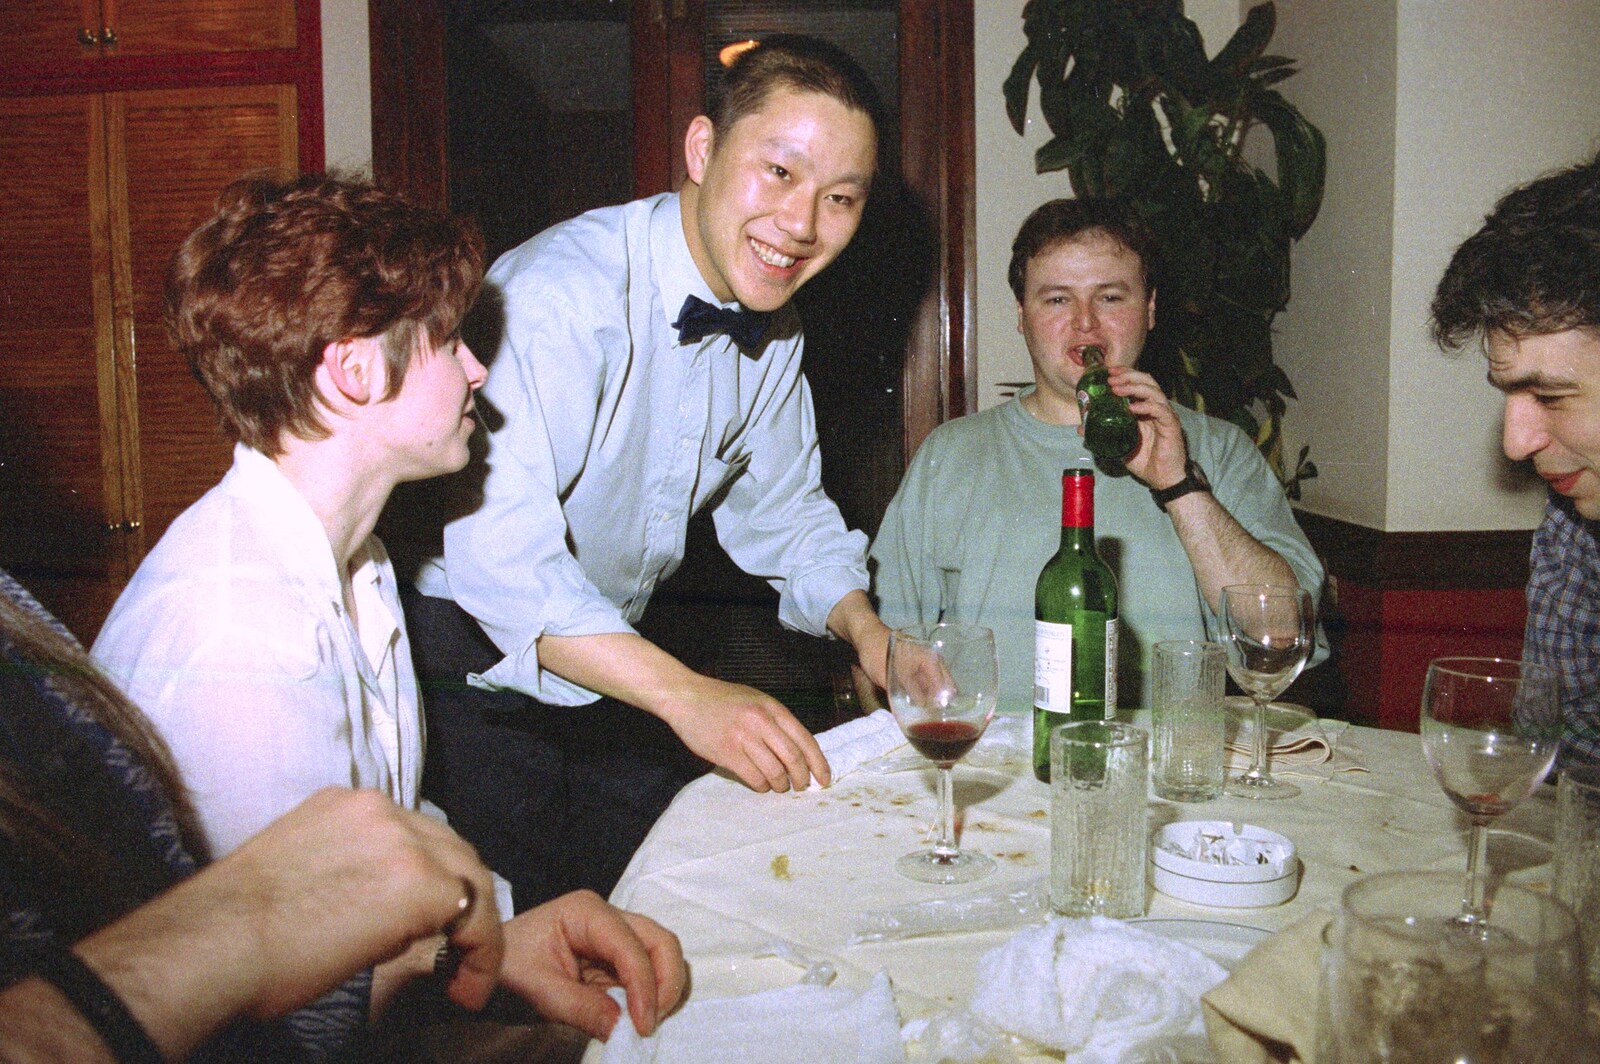 The waiter shows us a trick with towels from CISU: A Chinese Restaurant and SCC Sports Day, Ipswich and Norwich - 1st May 1997